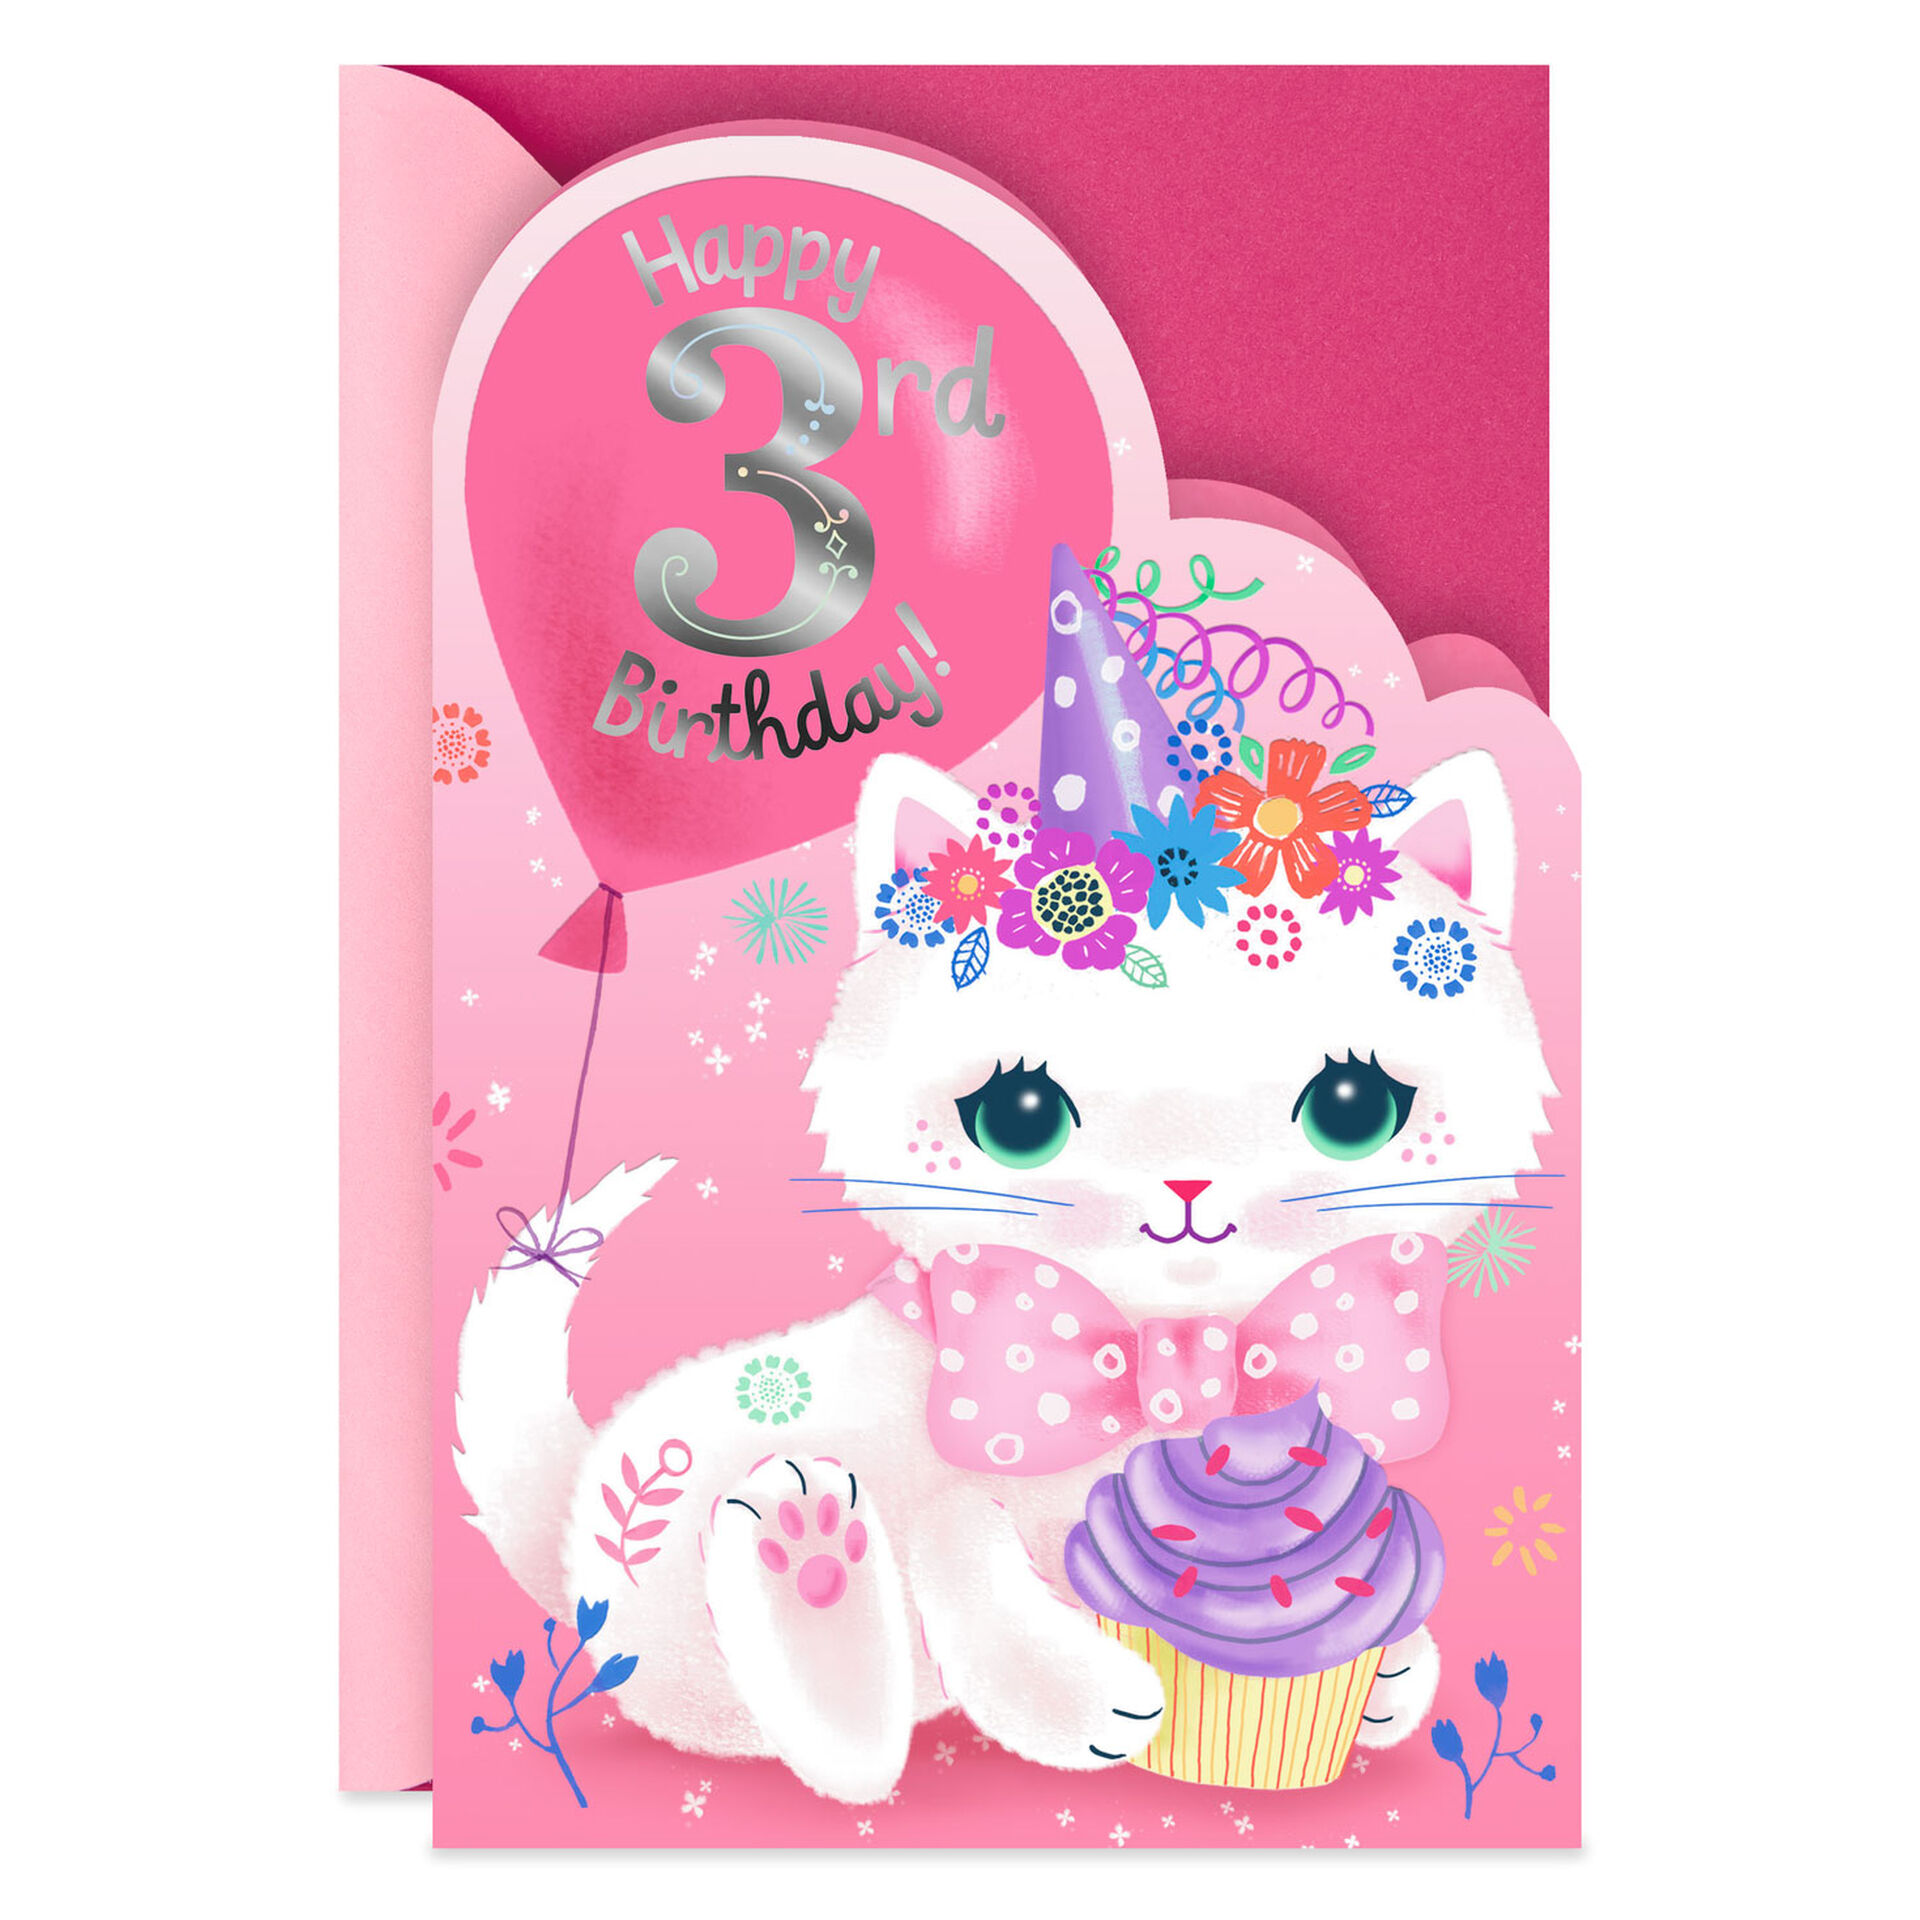 Cuteness-and-Smile-3rd-Birthday-Card_299HKB5946_01